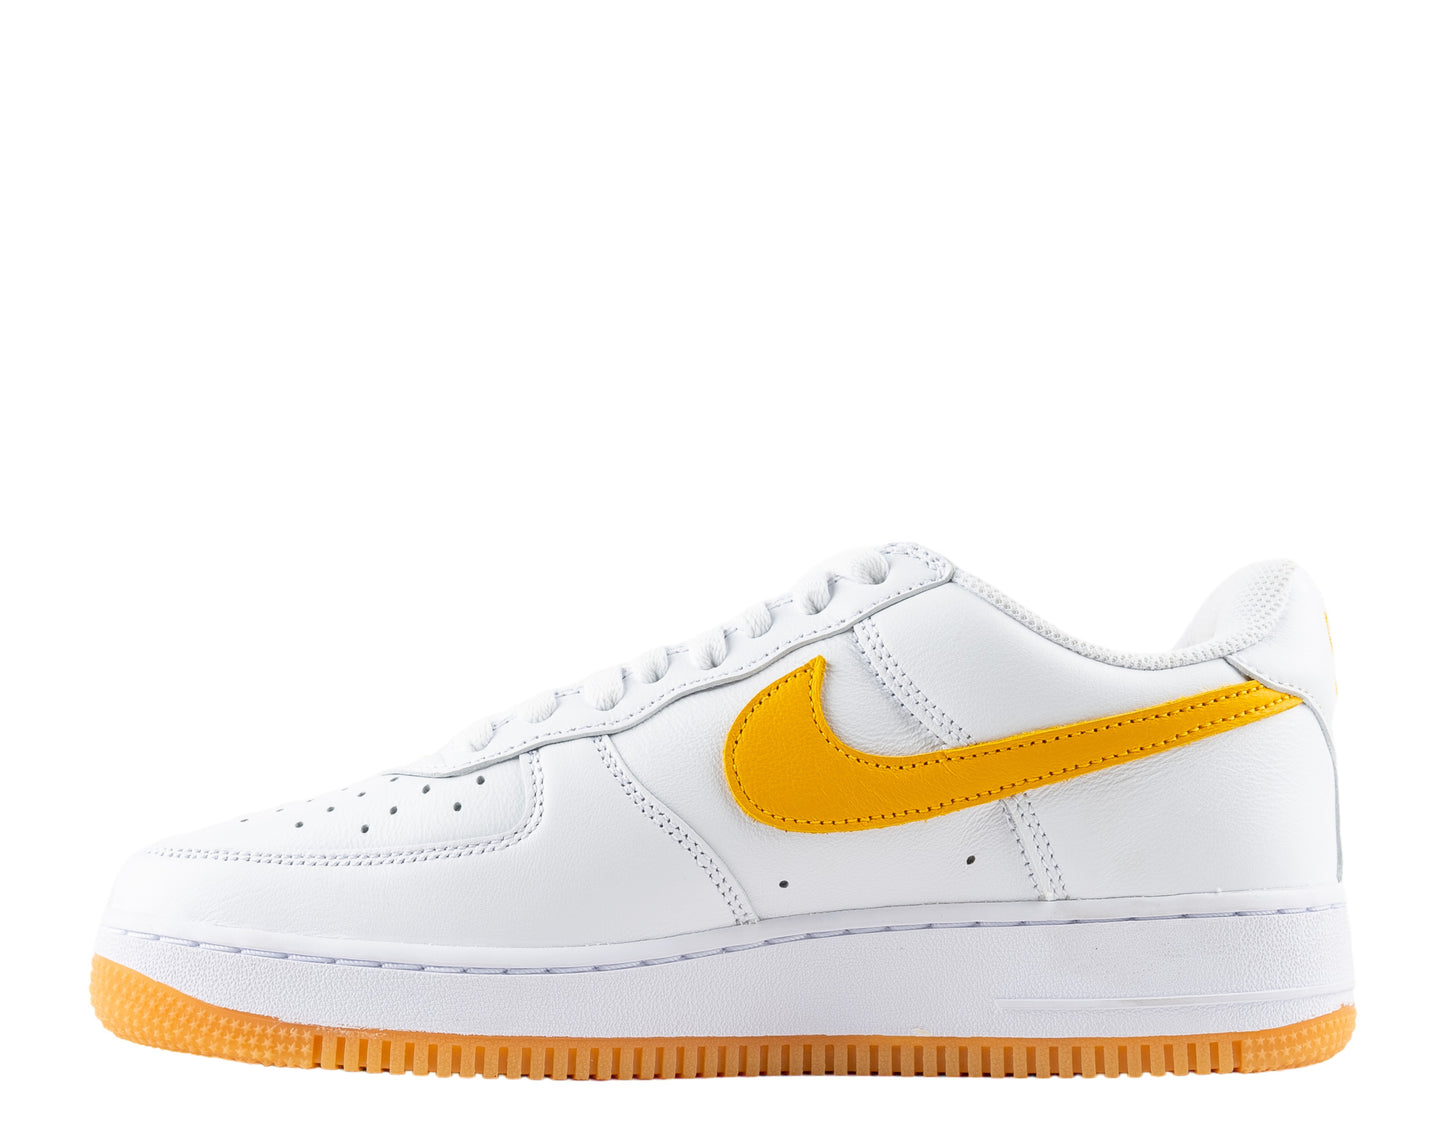 Nike Air Force 1 Low Retro QS Men's Basketball Shoes